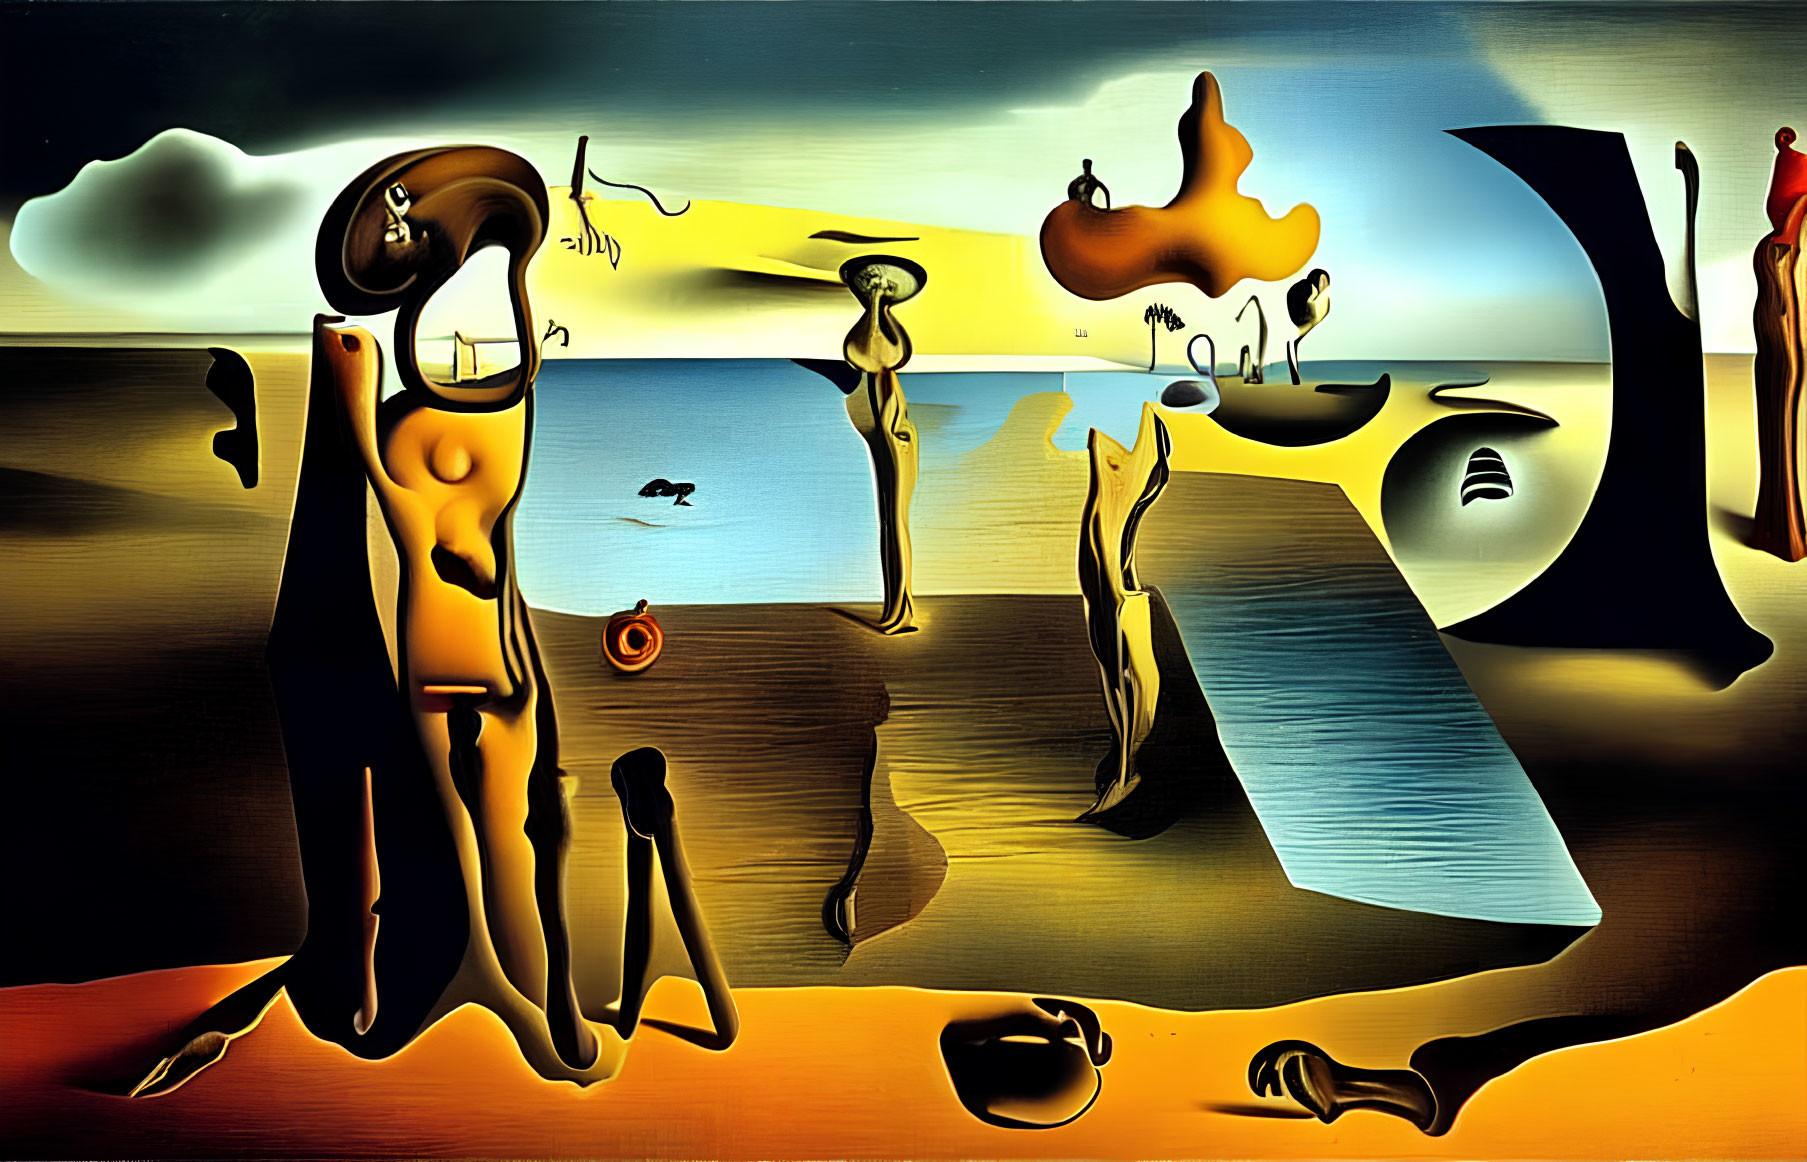 Surreal landscape with distorted figures and melting clocks